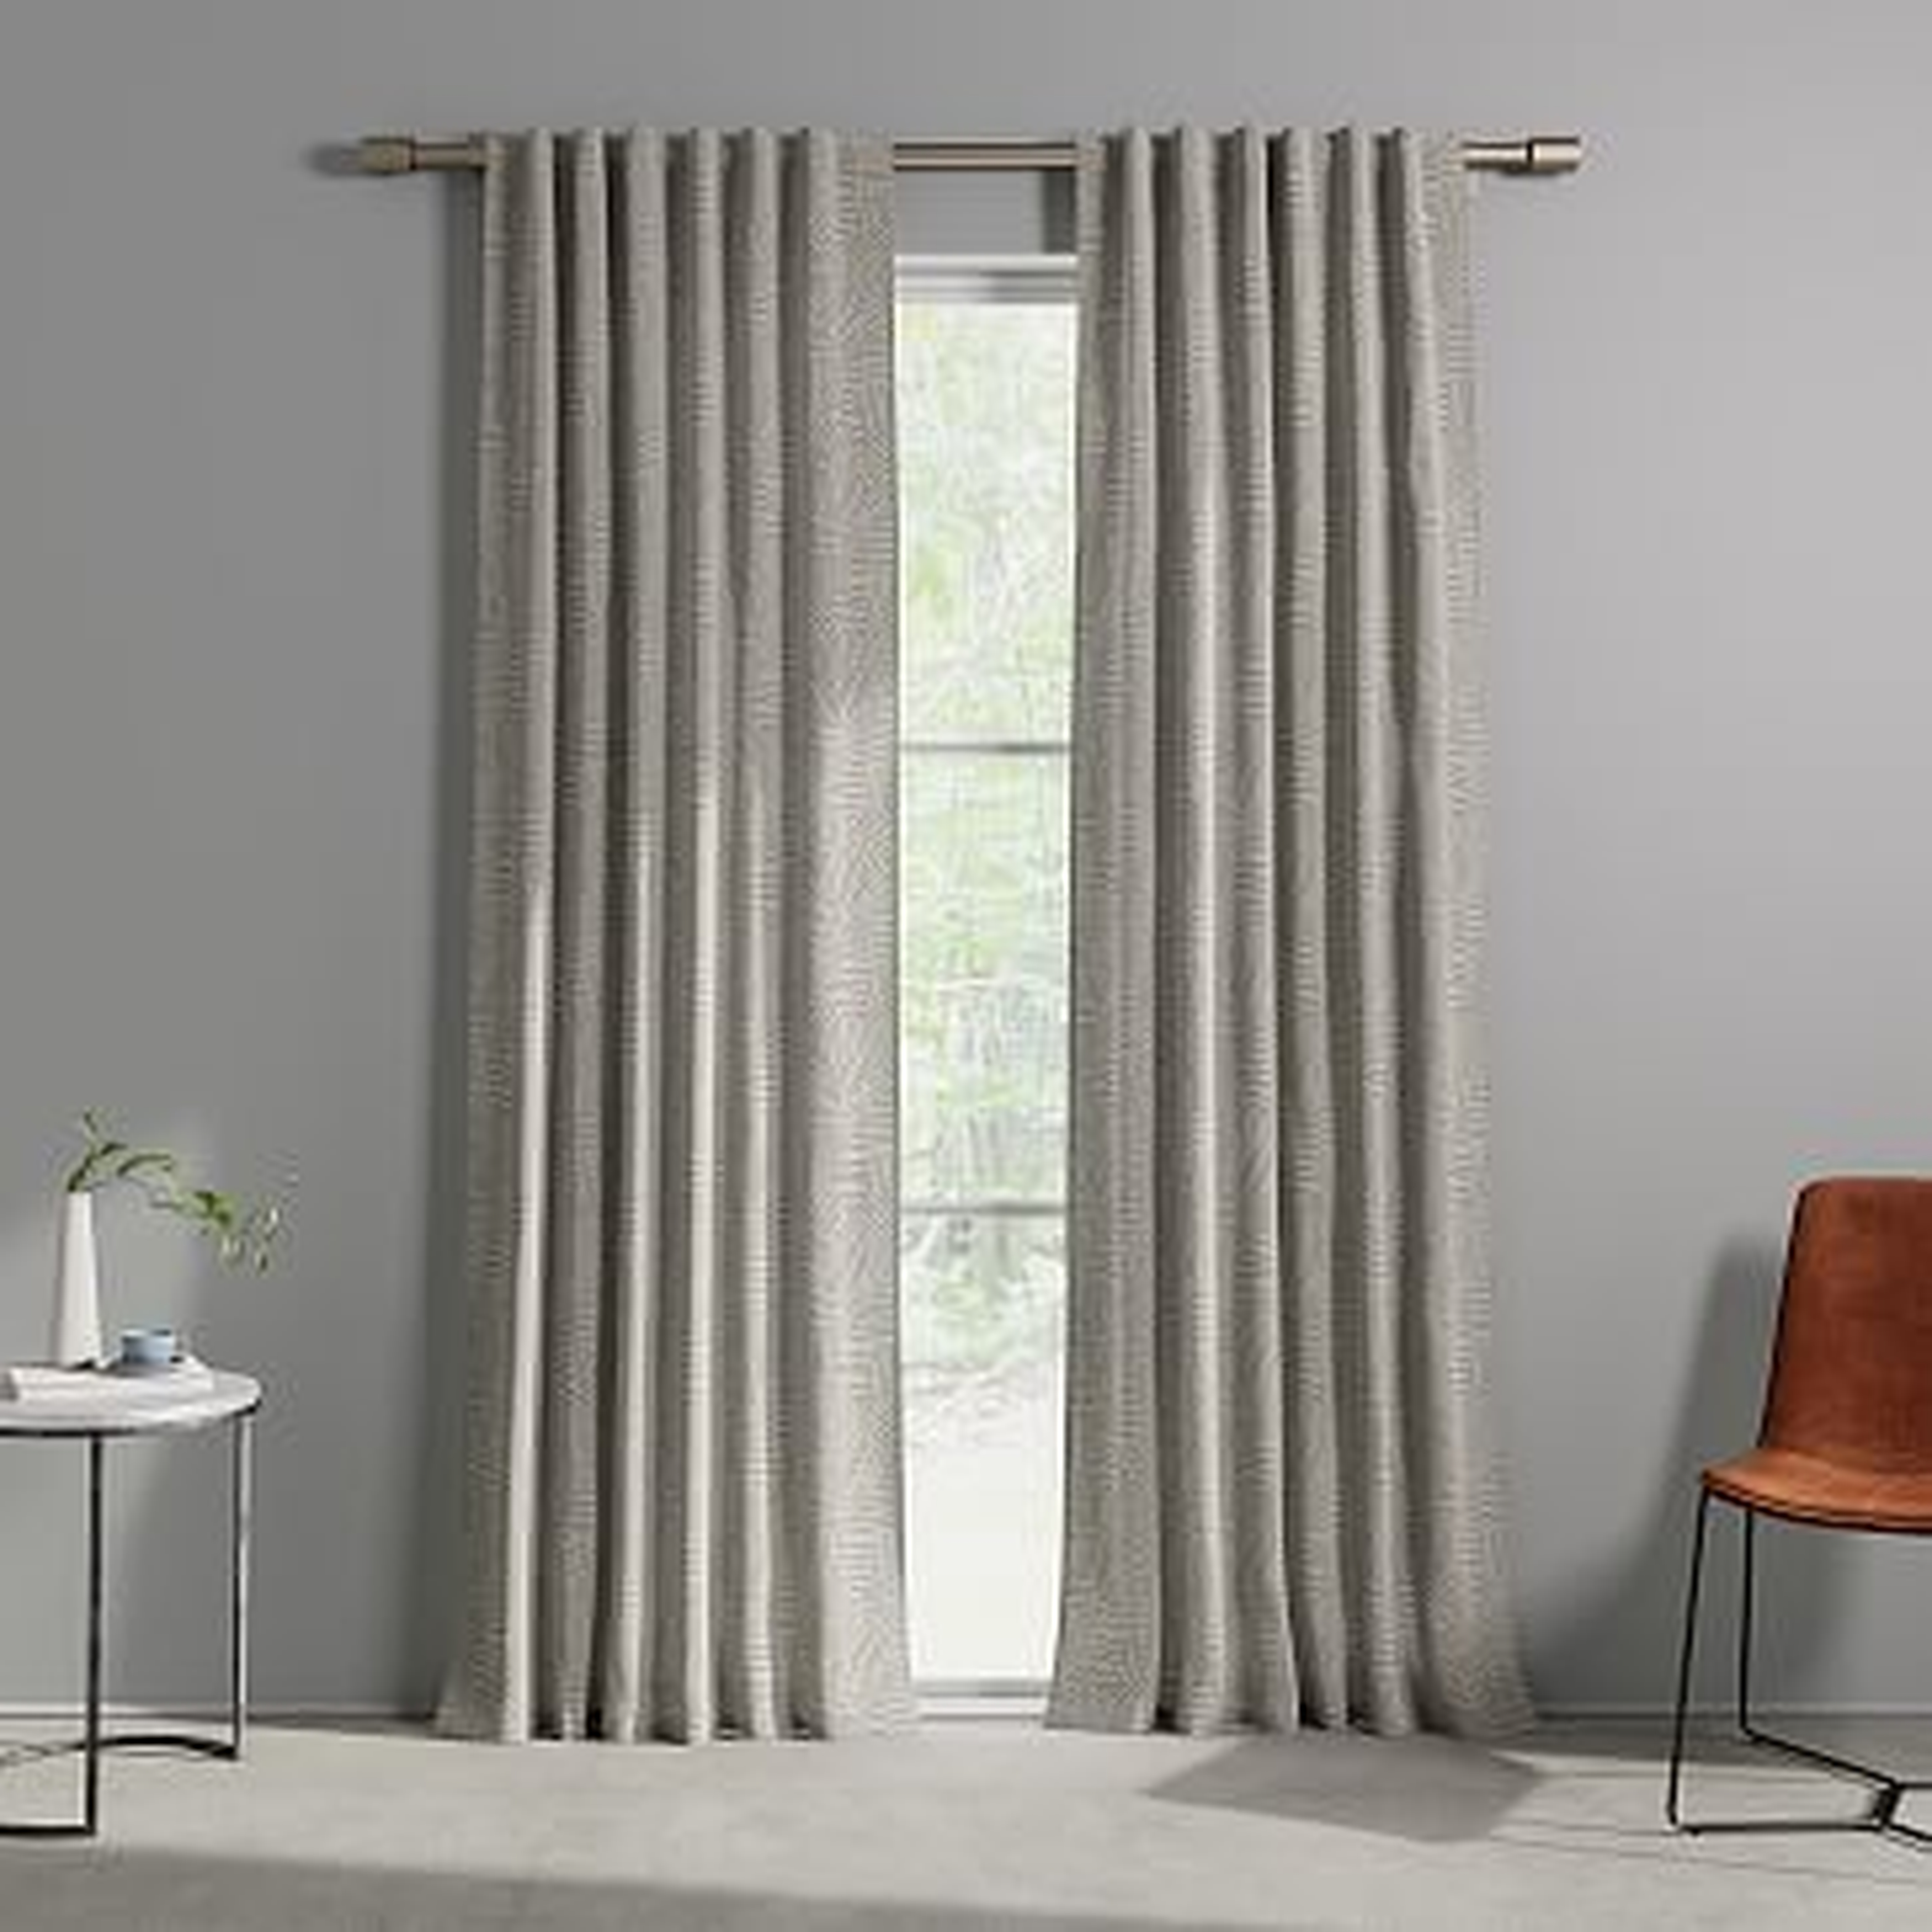 Cotton Canvas Tossed Lines Curtain, Set of 2, Stone Gray, 48"x108" - West Elm